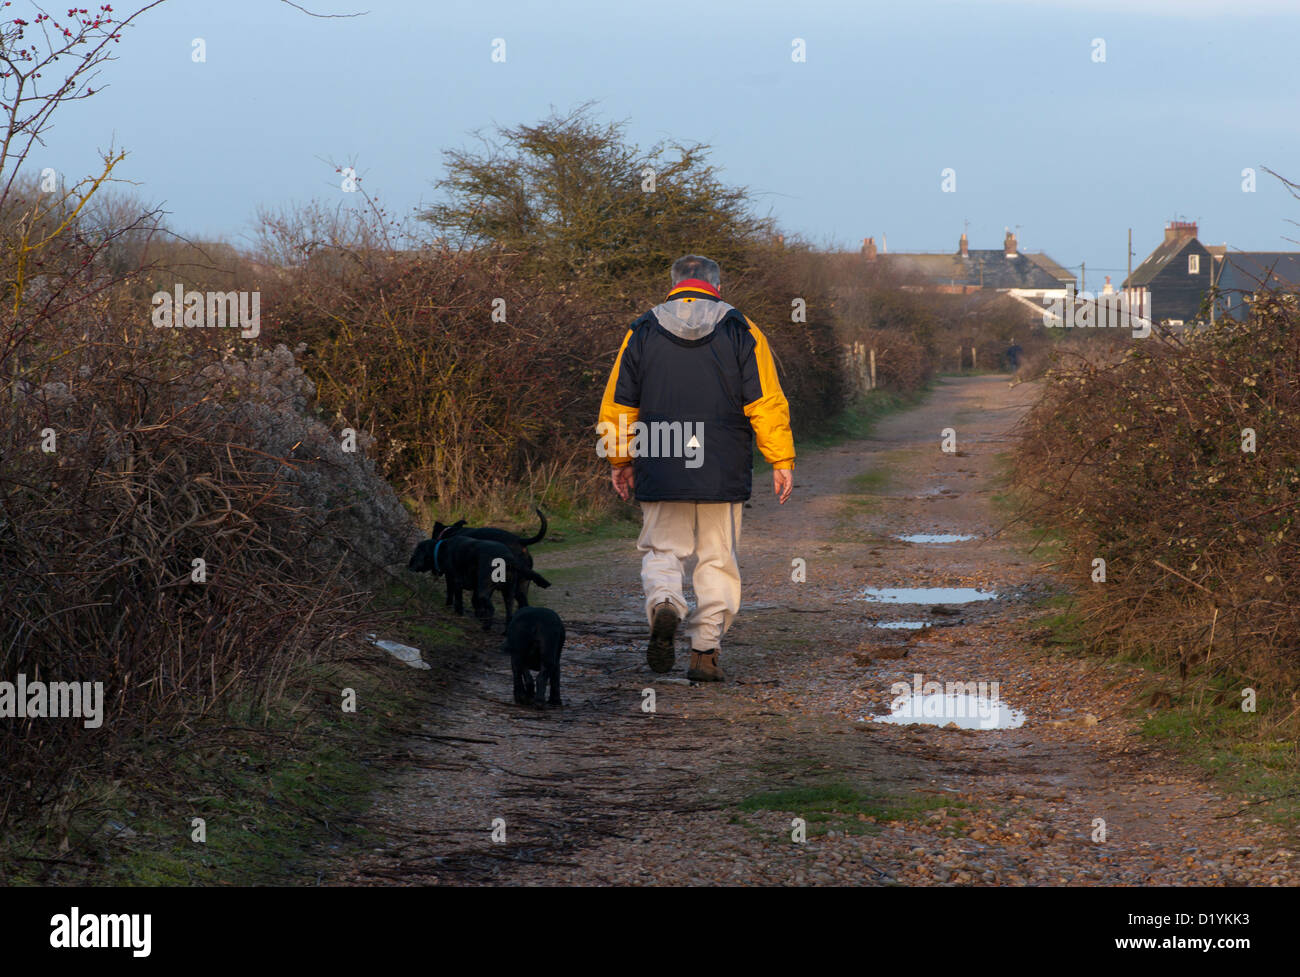 Rear View Of A Person Walikng Hunde In der Landschaft UK Stockfoto